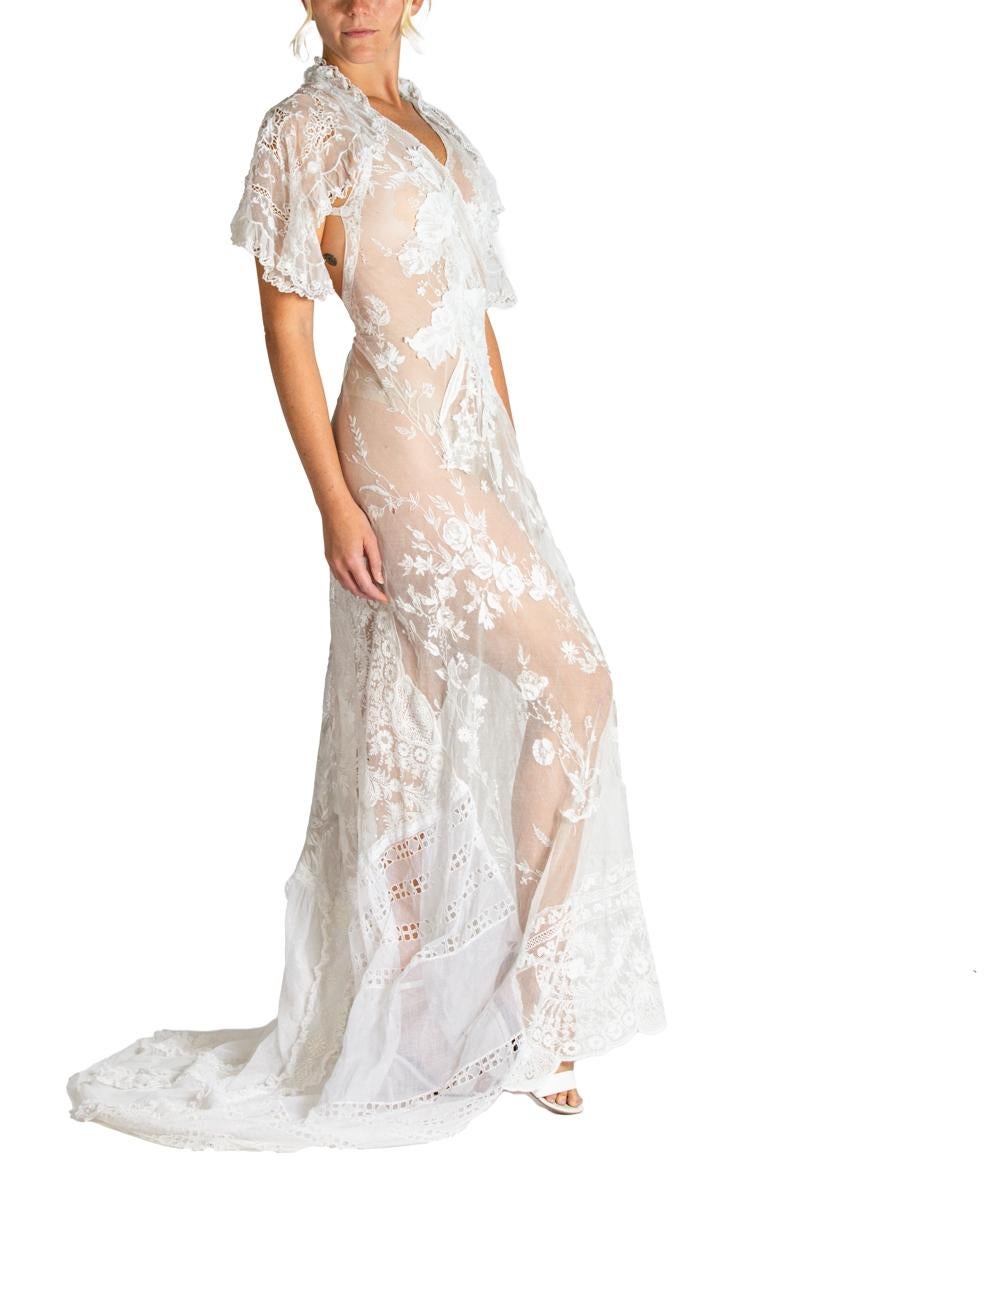 MORPHEW ATELIER White Cotton Embroidered Antique Net Lace Gown With Cut-Out Back For Sale 1